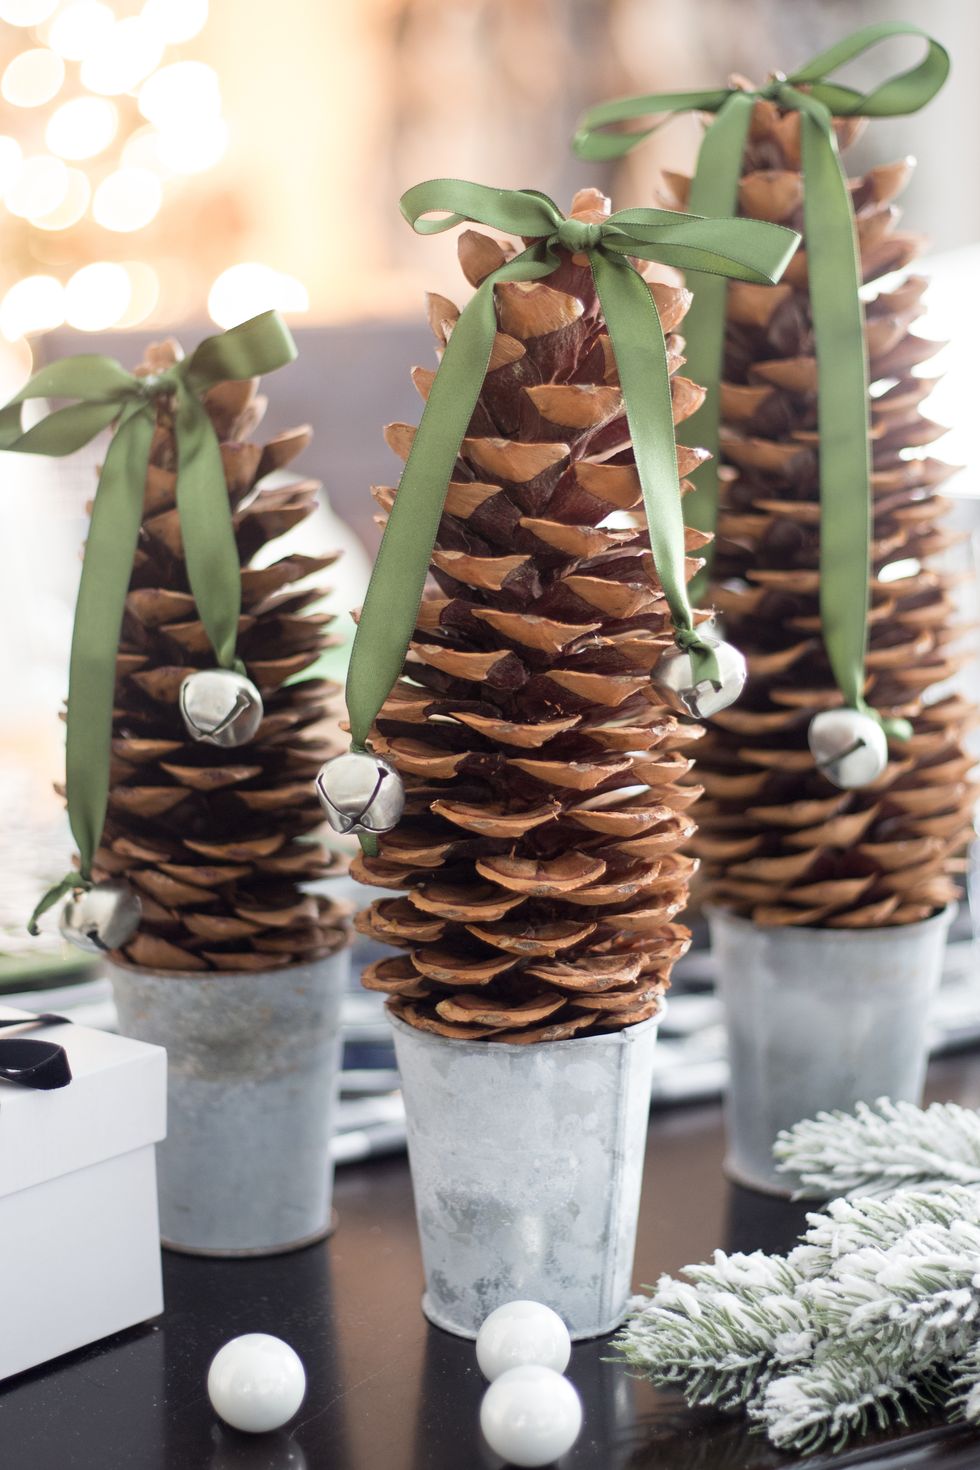 https://hips.hearstapps.com/hmg-prod/images/pine-cone-trees-pine-cone-crafts-1629907328.jpeg?crop=0.9233823872926886xw:1xh;center,top&resize=980:*